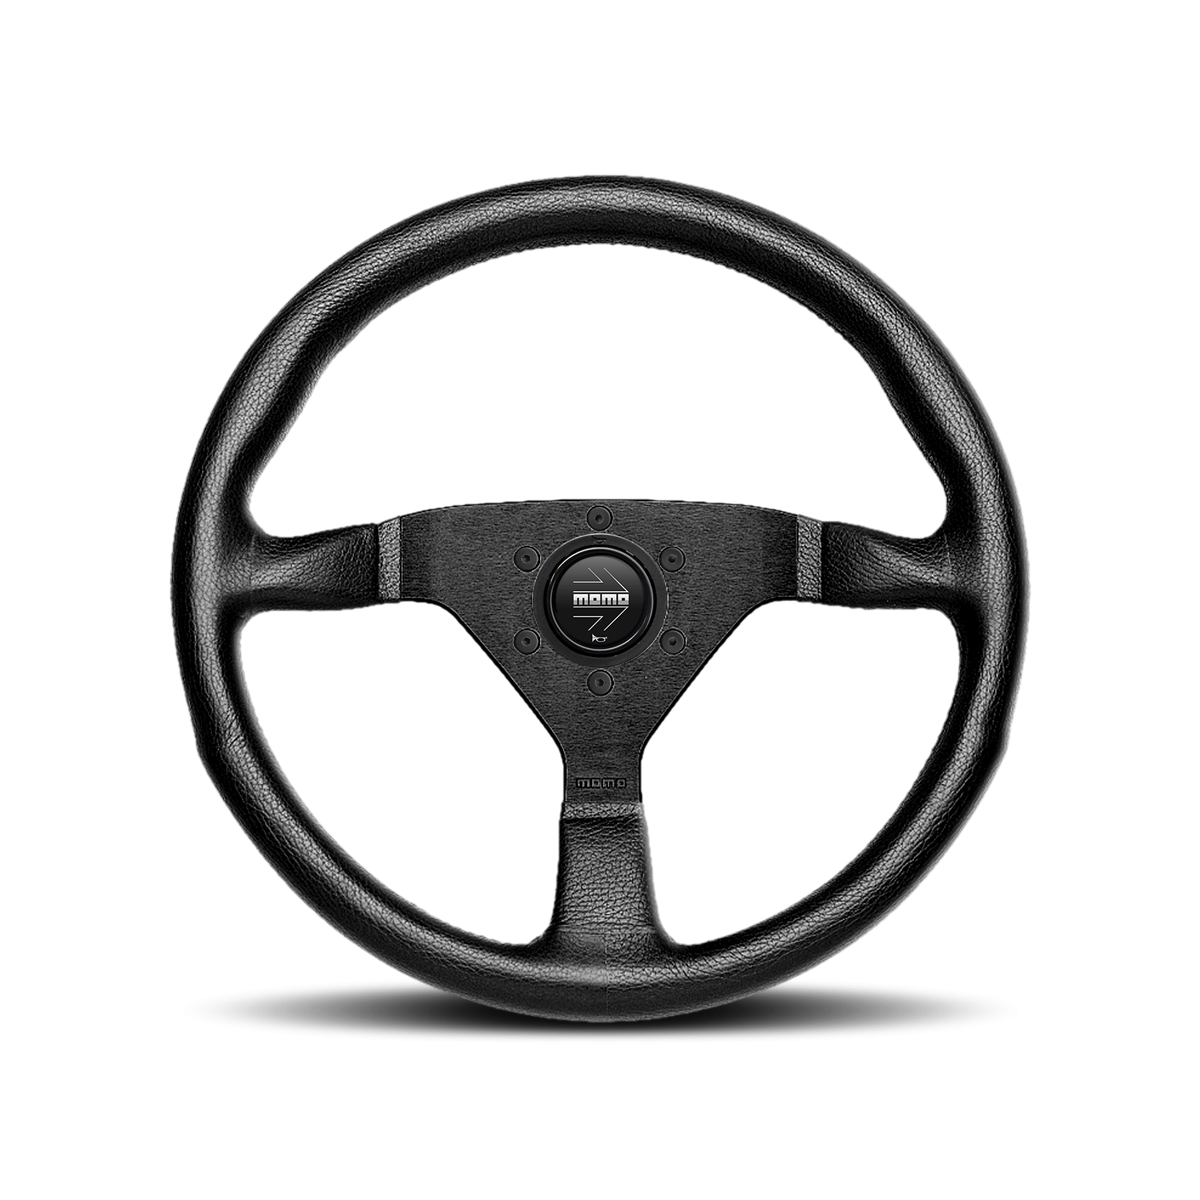 MOMO Montecarlo Steering Wheel 350 mm - Black Leather/Red Stitch/Brushed Black Anodized Spokes - Dirty Racing Products